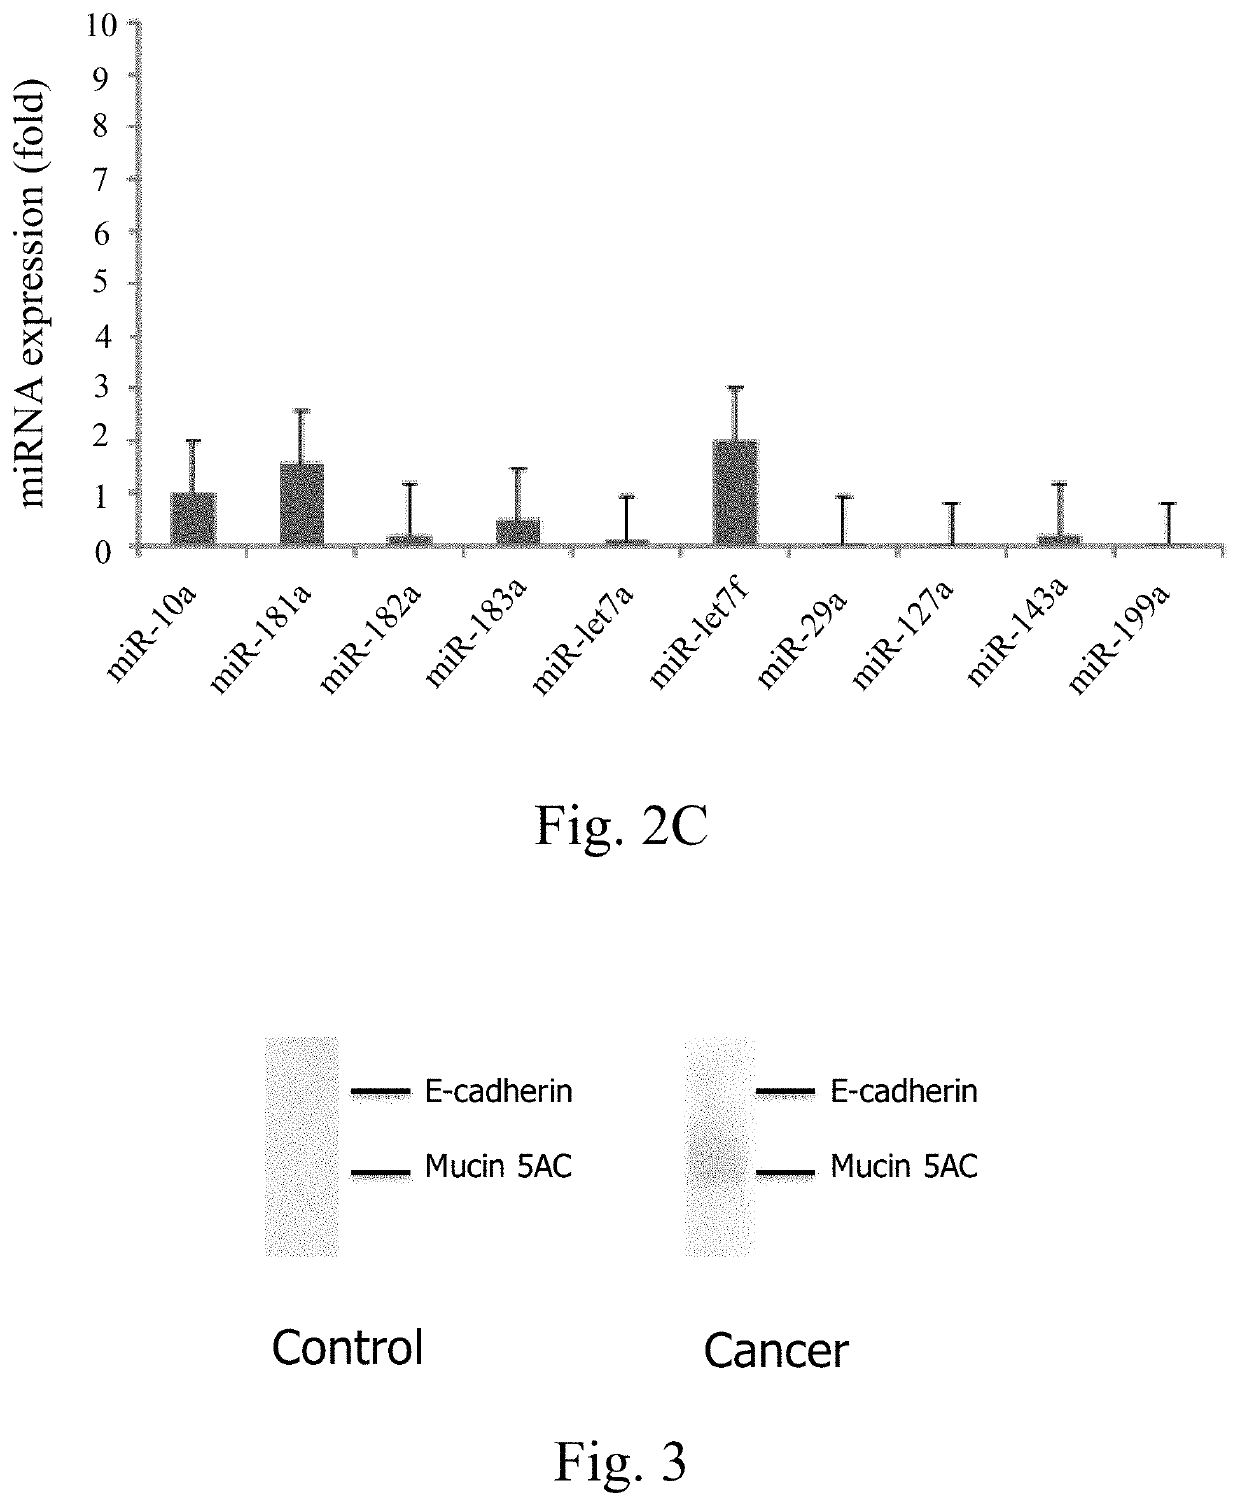 Methods of diagnosing diseases by extracellular vesicles and uses thereof